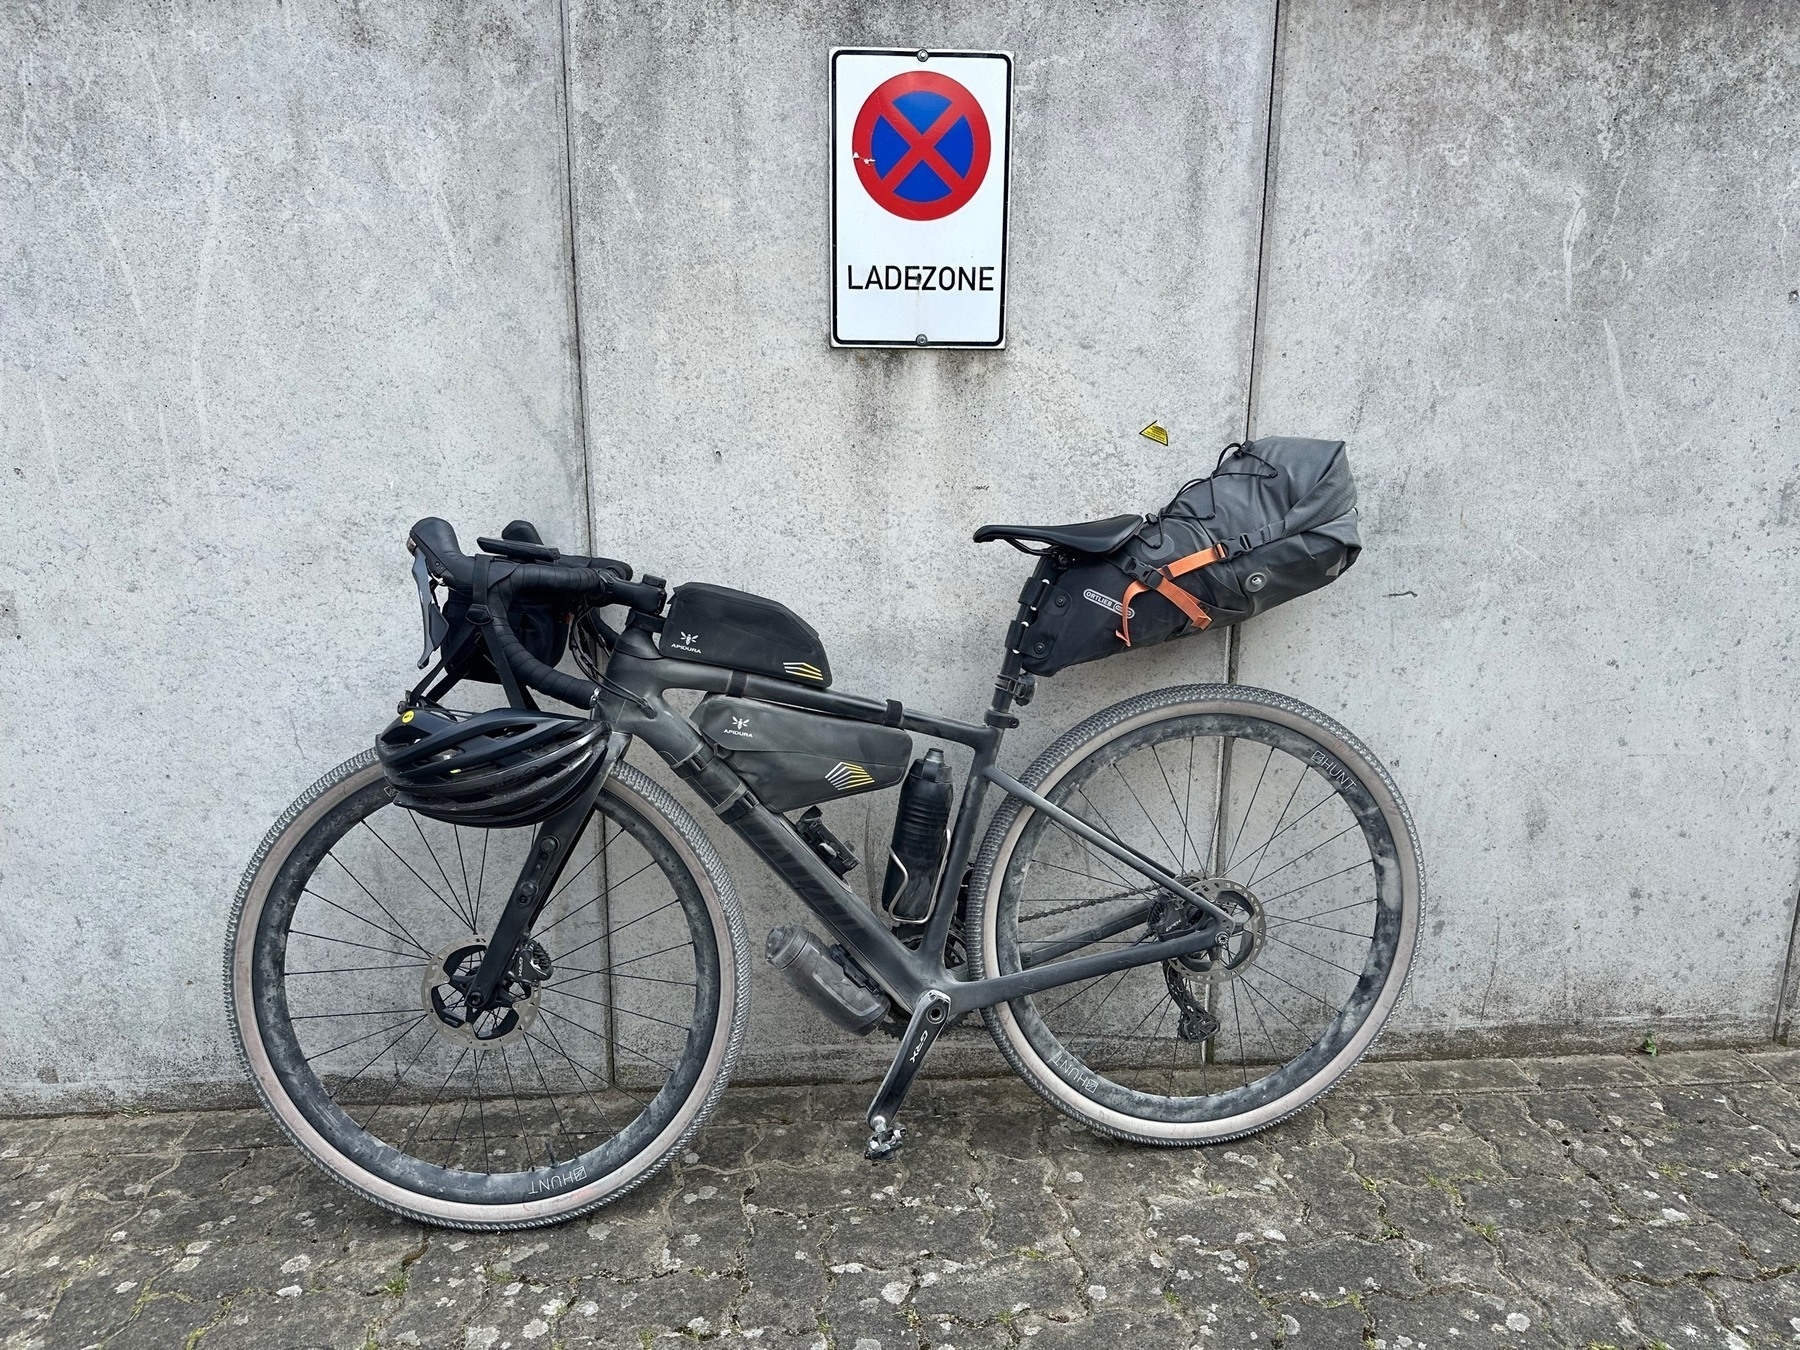 Dusty gravel bike leaning against a concrete wall in front of "loading zone" sign.